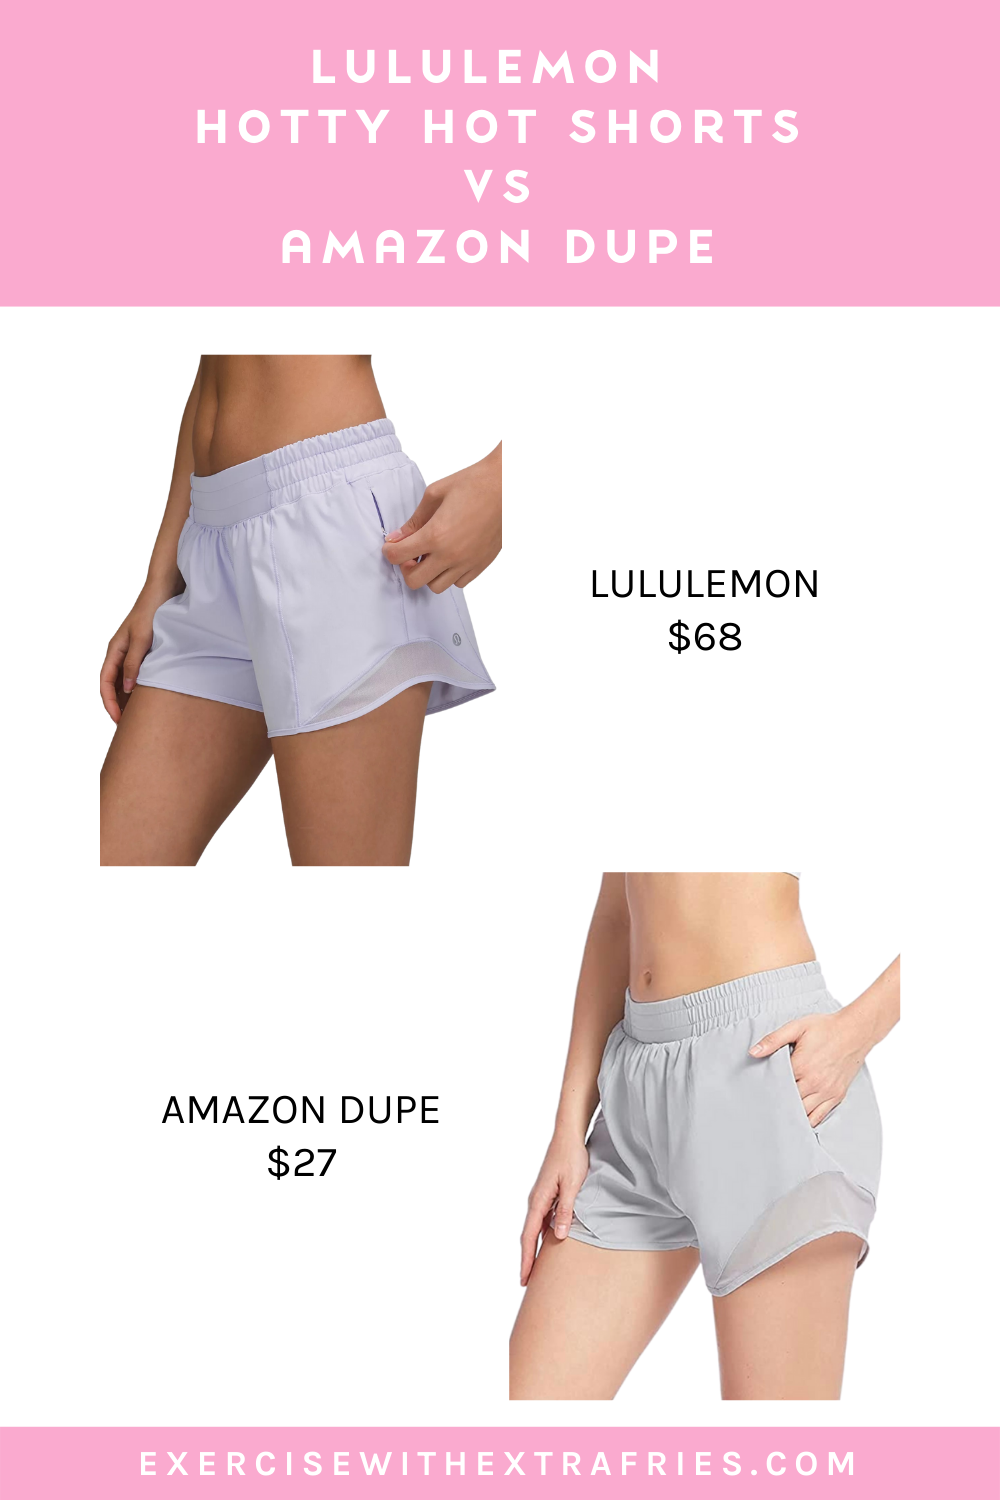 Found a dupe for the Lululemon Hotty Hot shorts for less on